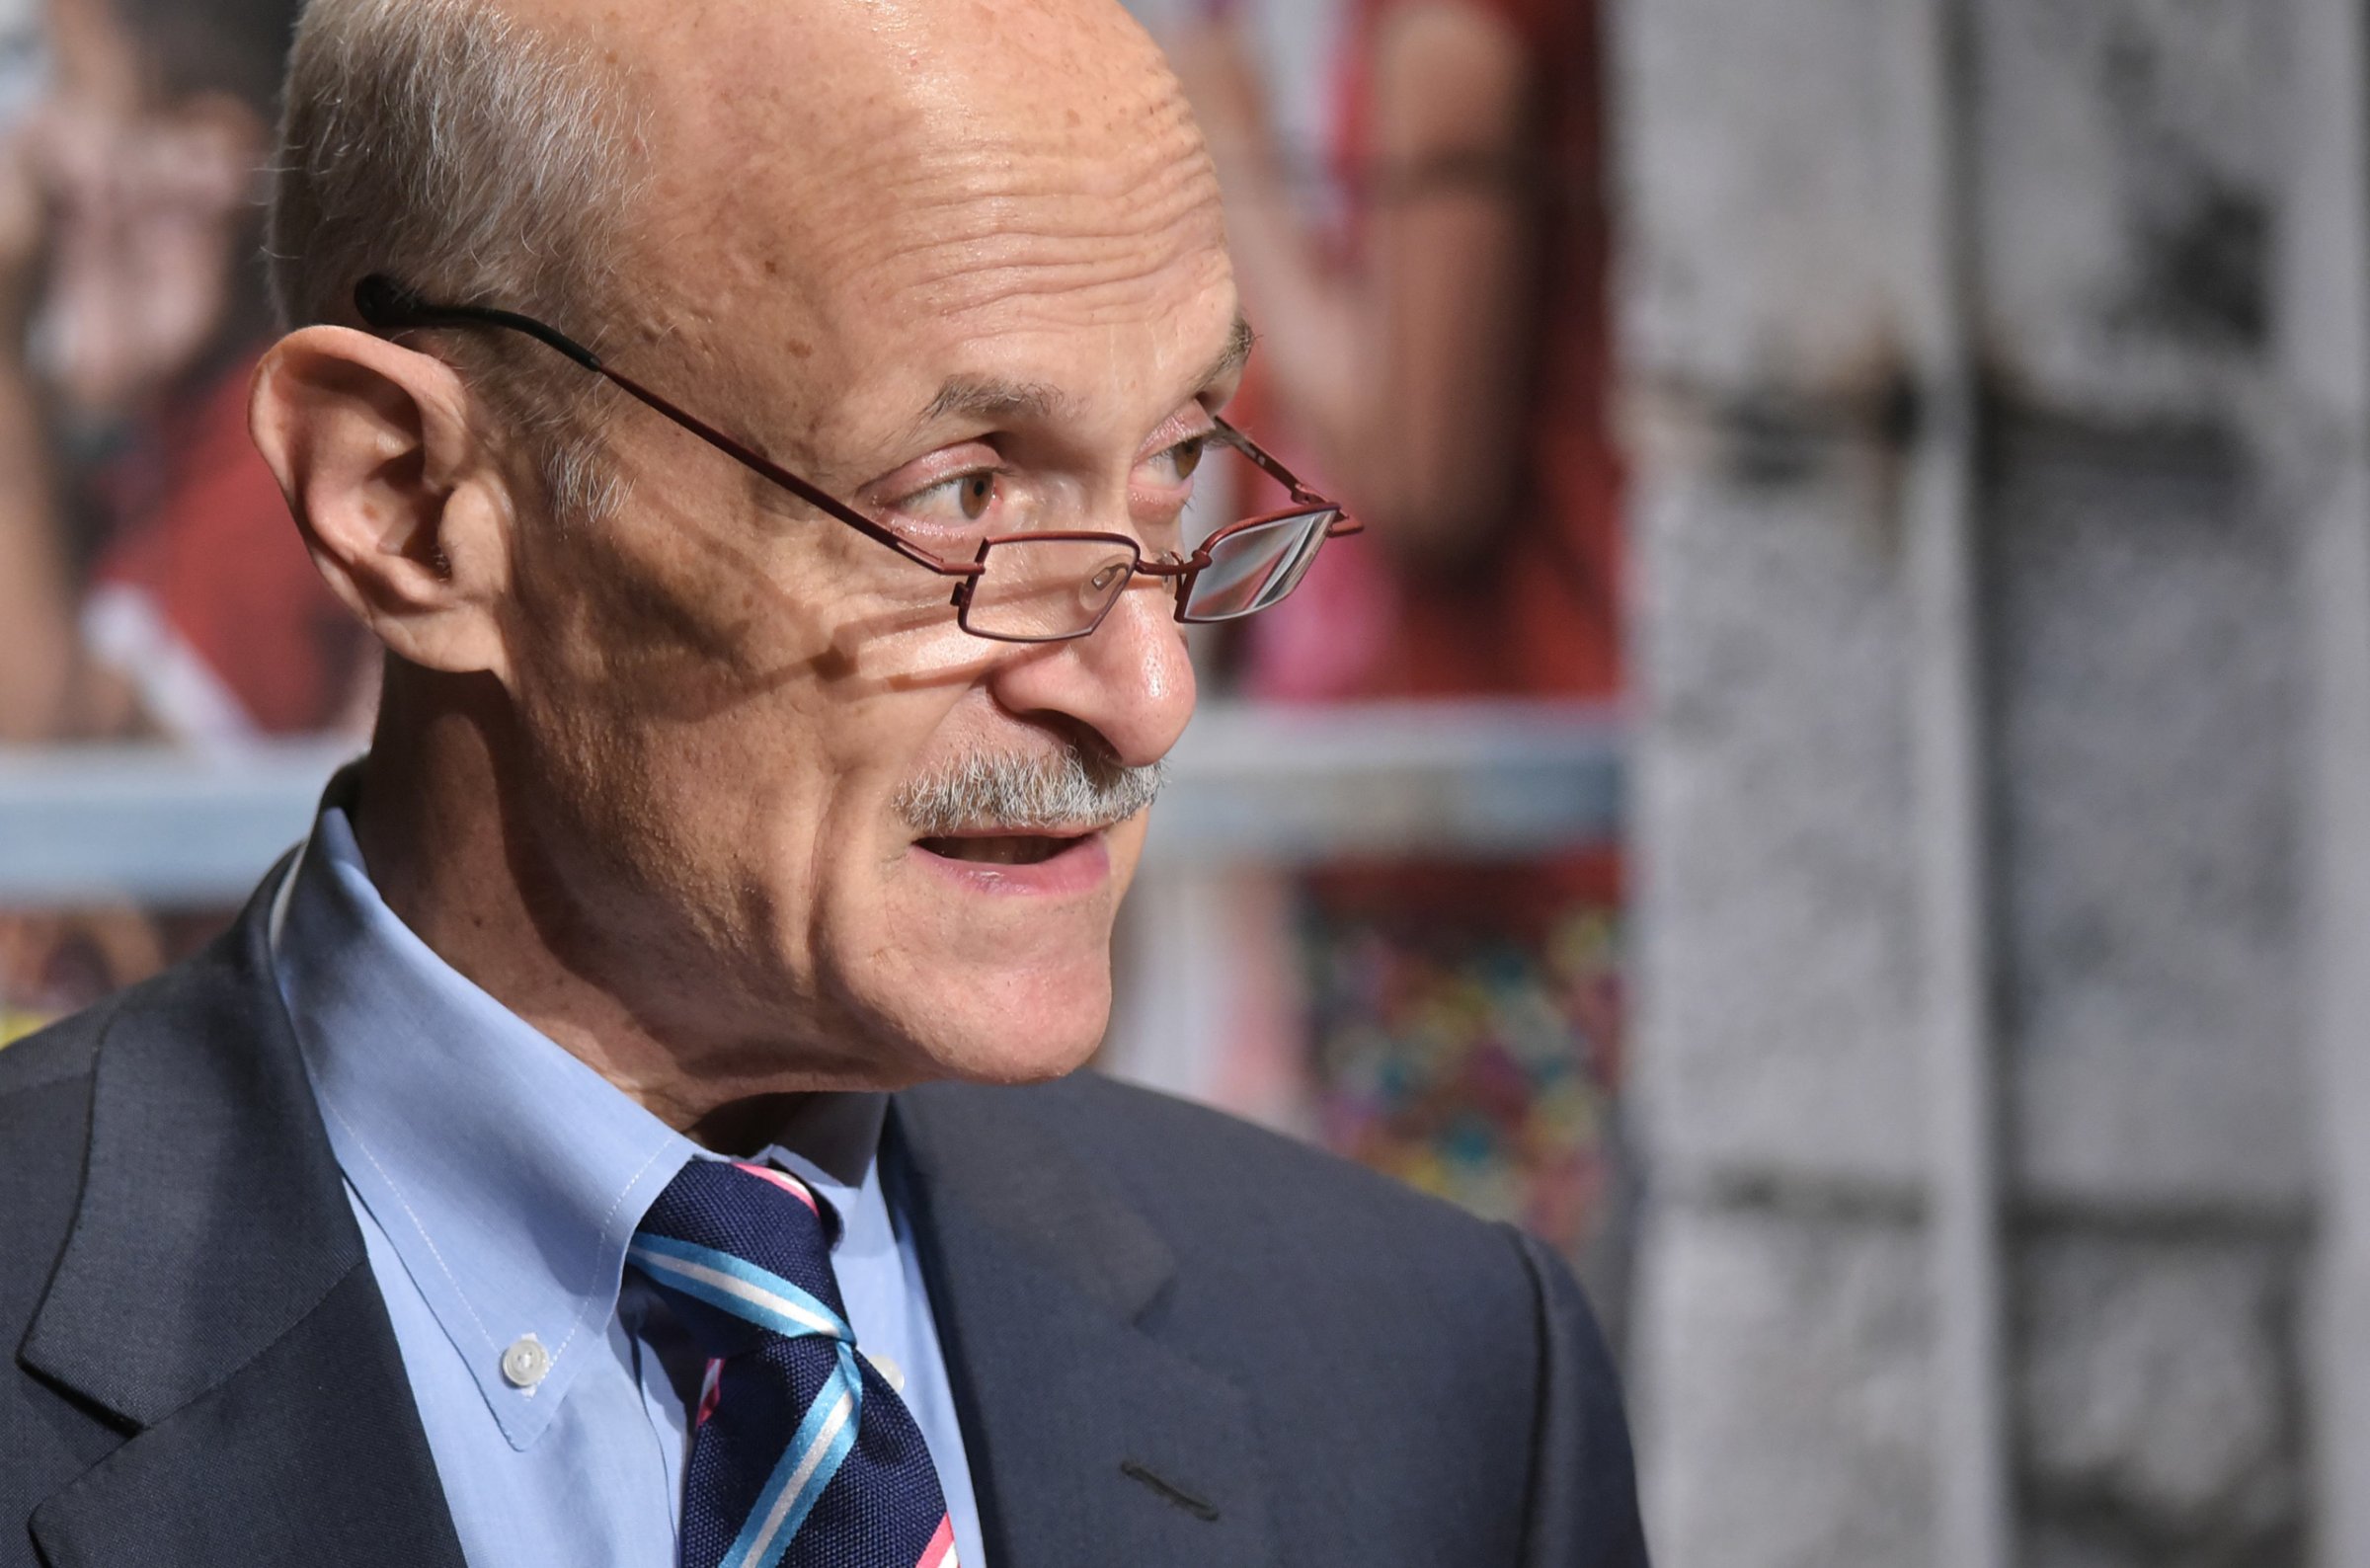 Former Homeland Security secretary and Chairman, Committee of Conscience, US Holocaust Memorial Museum, Michael Chertoff speaks at a press conference on November 12, 2015.